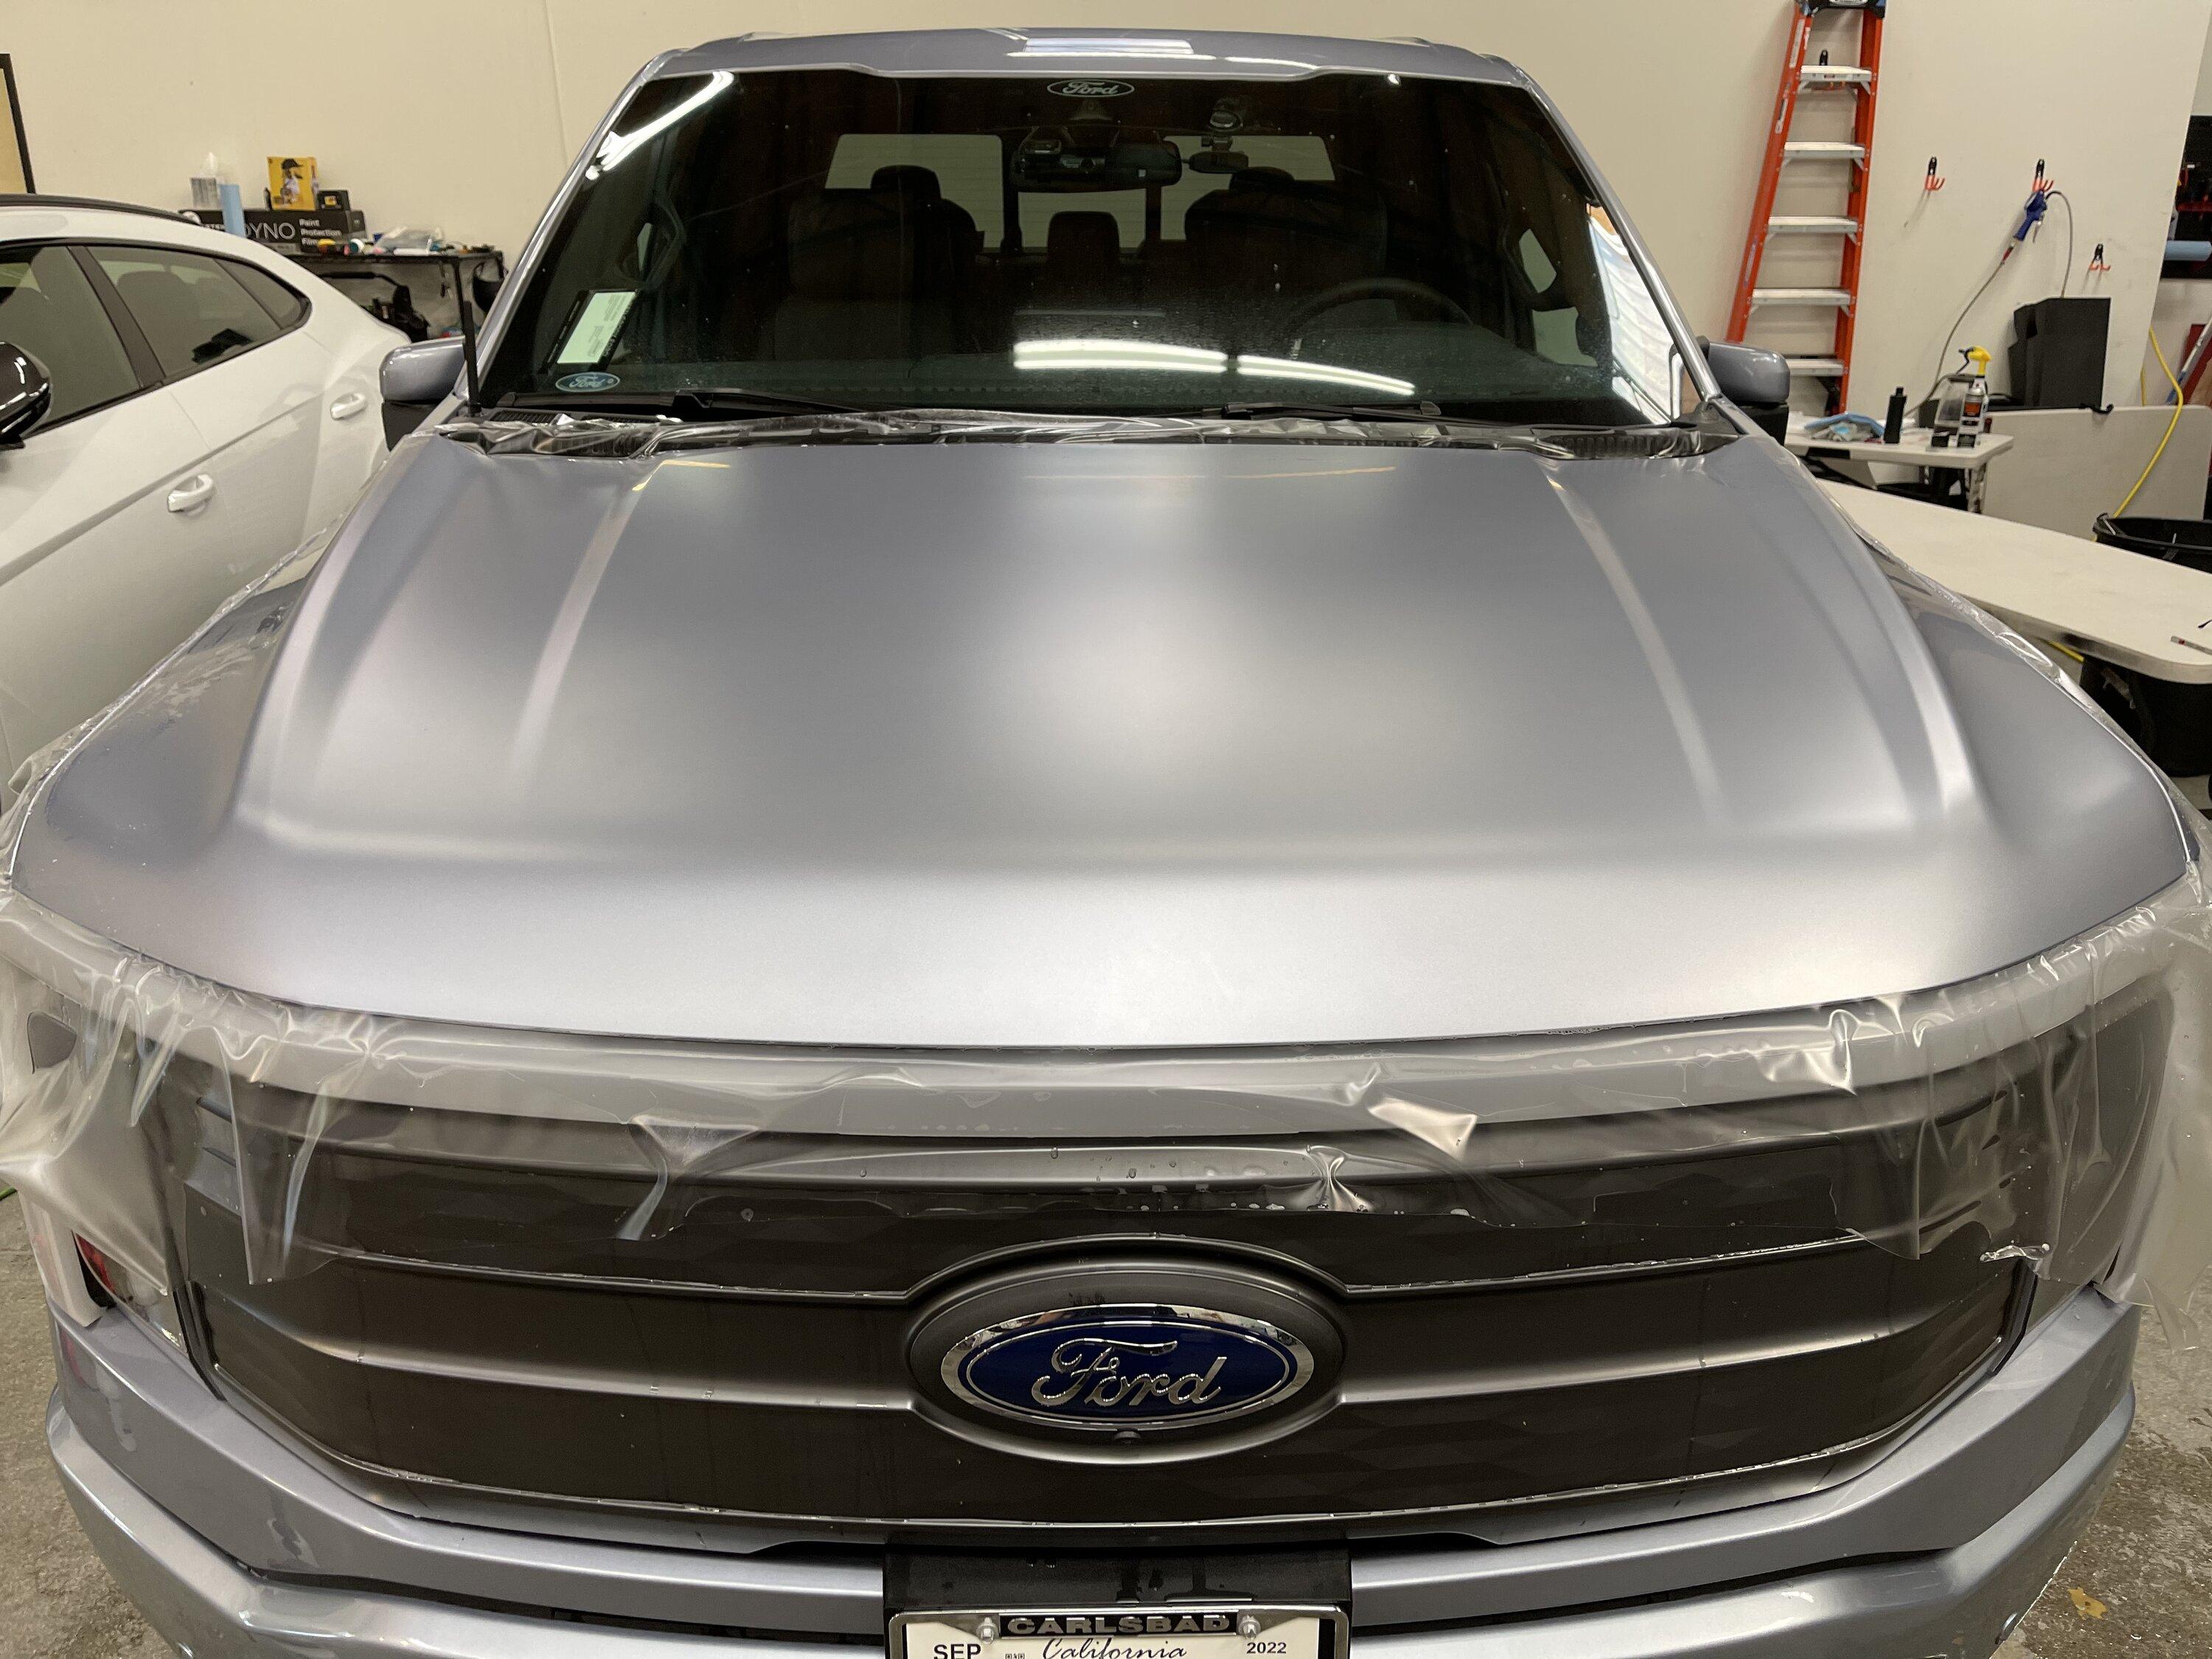 Ford F-150 Lightning Iced Blue Silver Lightning Build. Mods: PPF matte finish, Line-X, gloss black painted grille, black wrapped roof, wheels 4E0D9512-6027-4930-8614-A0F8F943218F